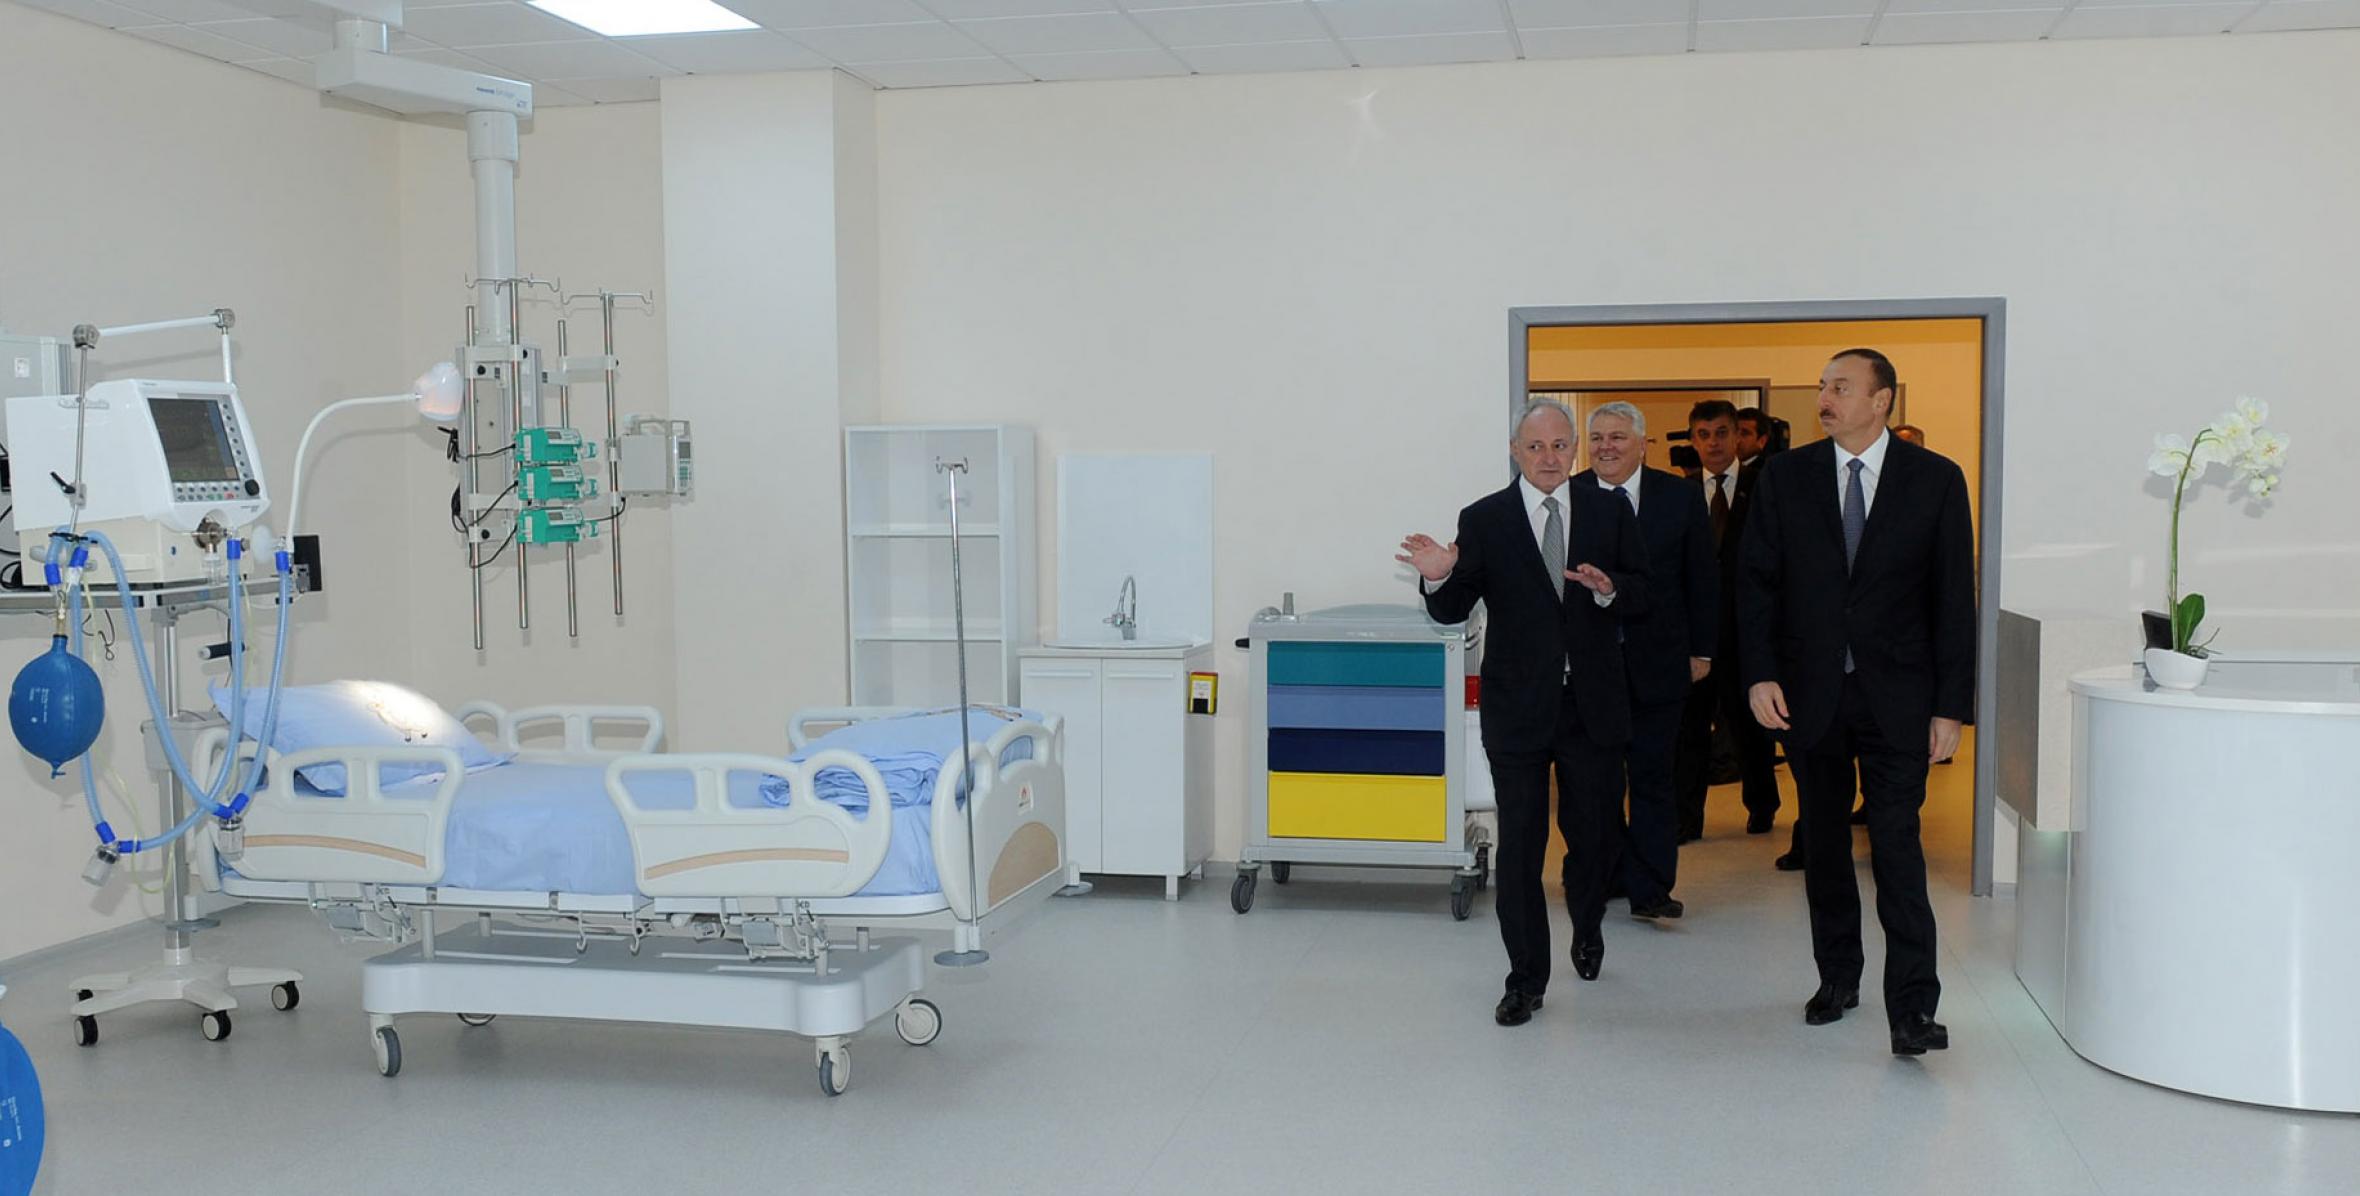 Ilham Aliyev attended the opening of the Center Hospital in Shaki